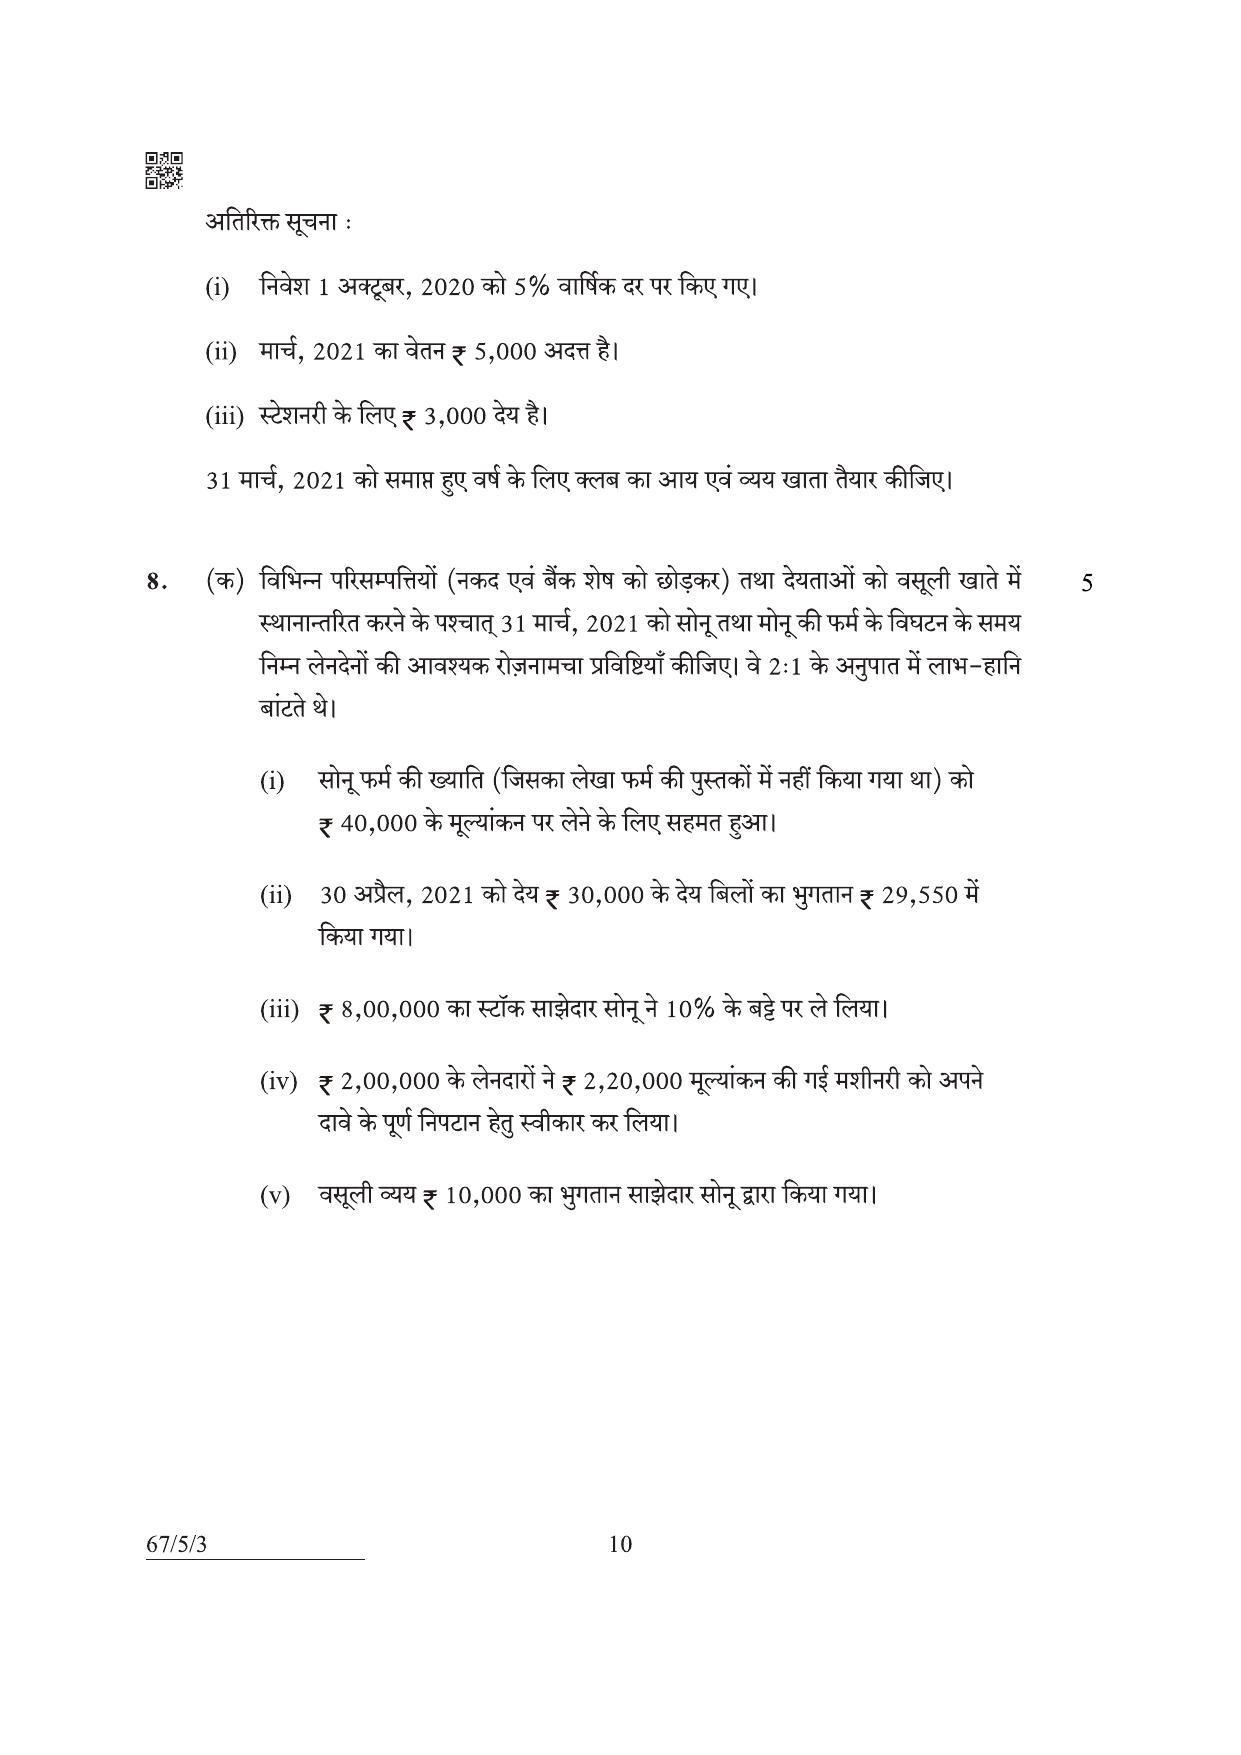 CBSE Class 12 67-5-3 Accountancy 2022 Question Paper - Page 10